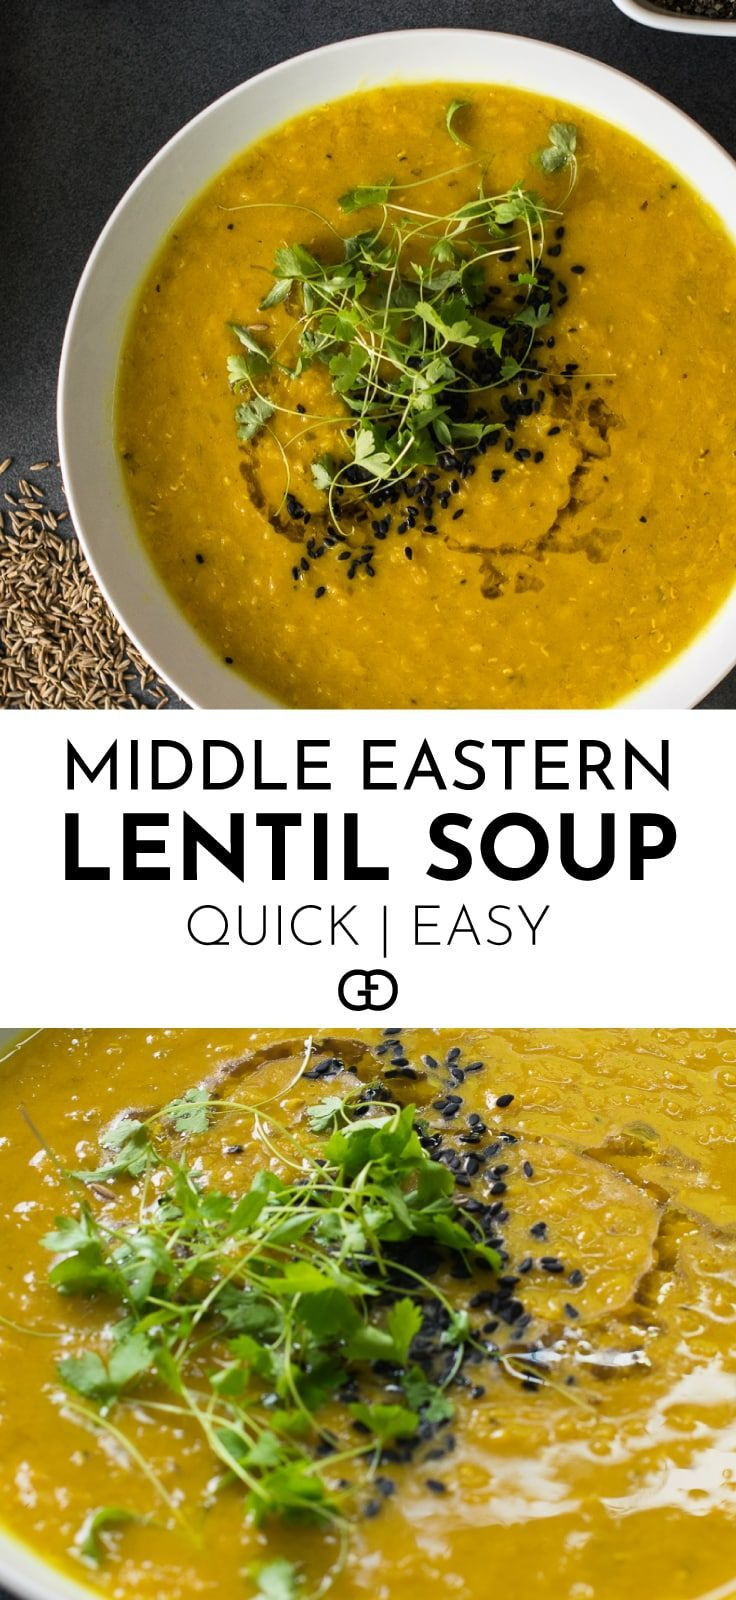 Middle Eastern Lentil Recipes
 Quick and Easy Middle Eastern Lentil Soup Recipe